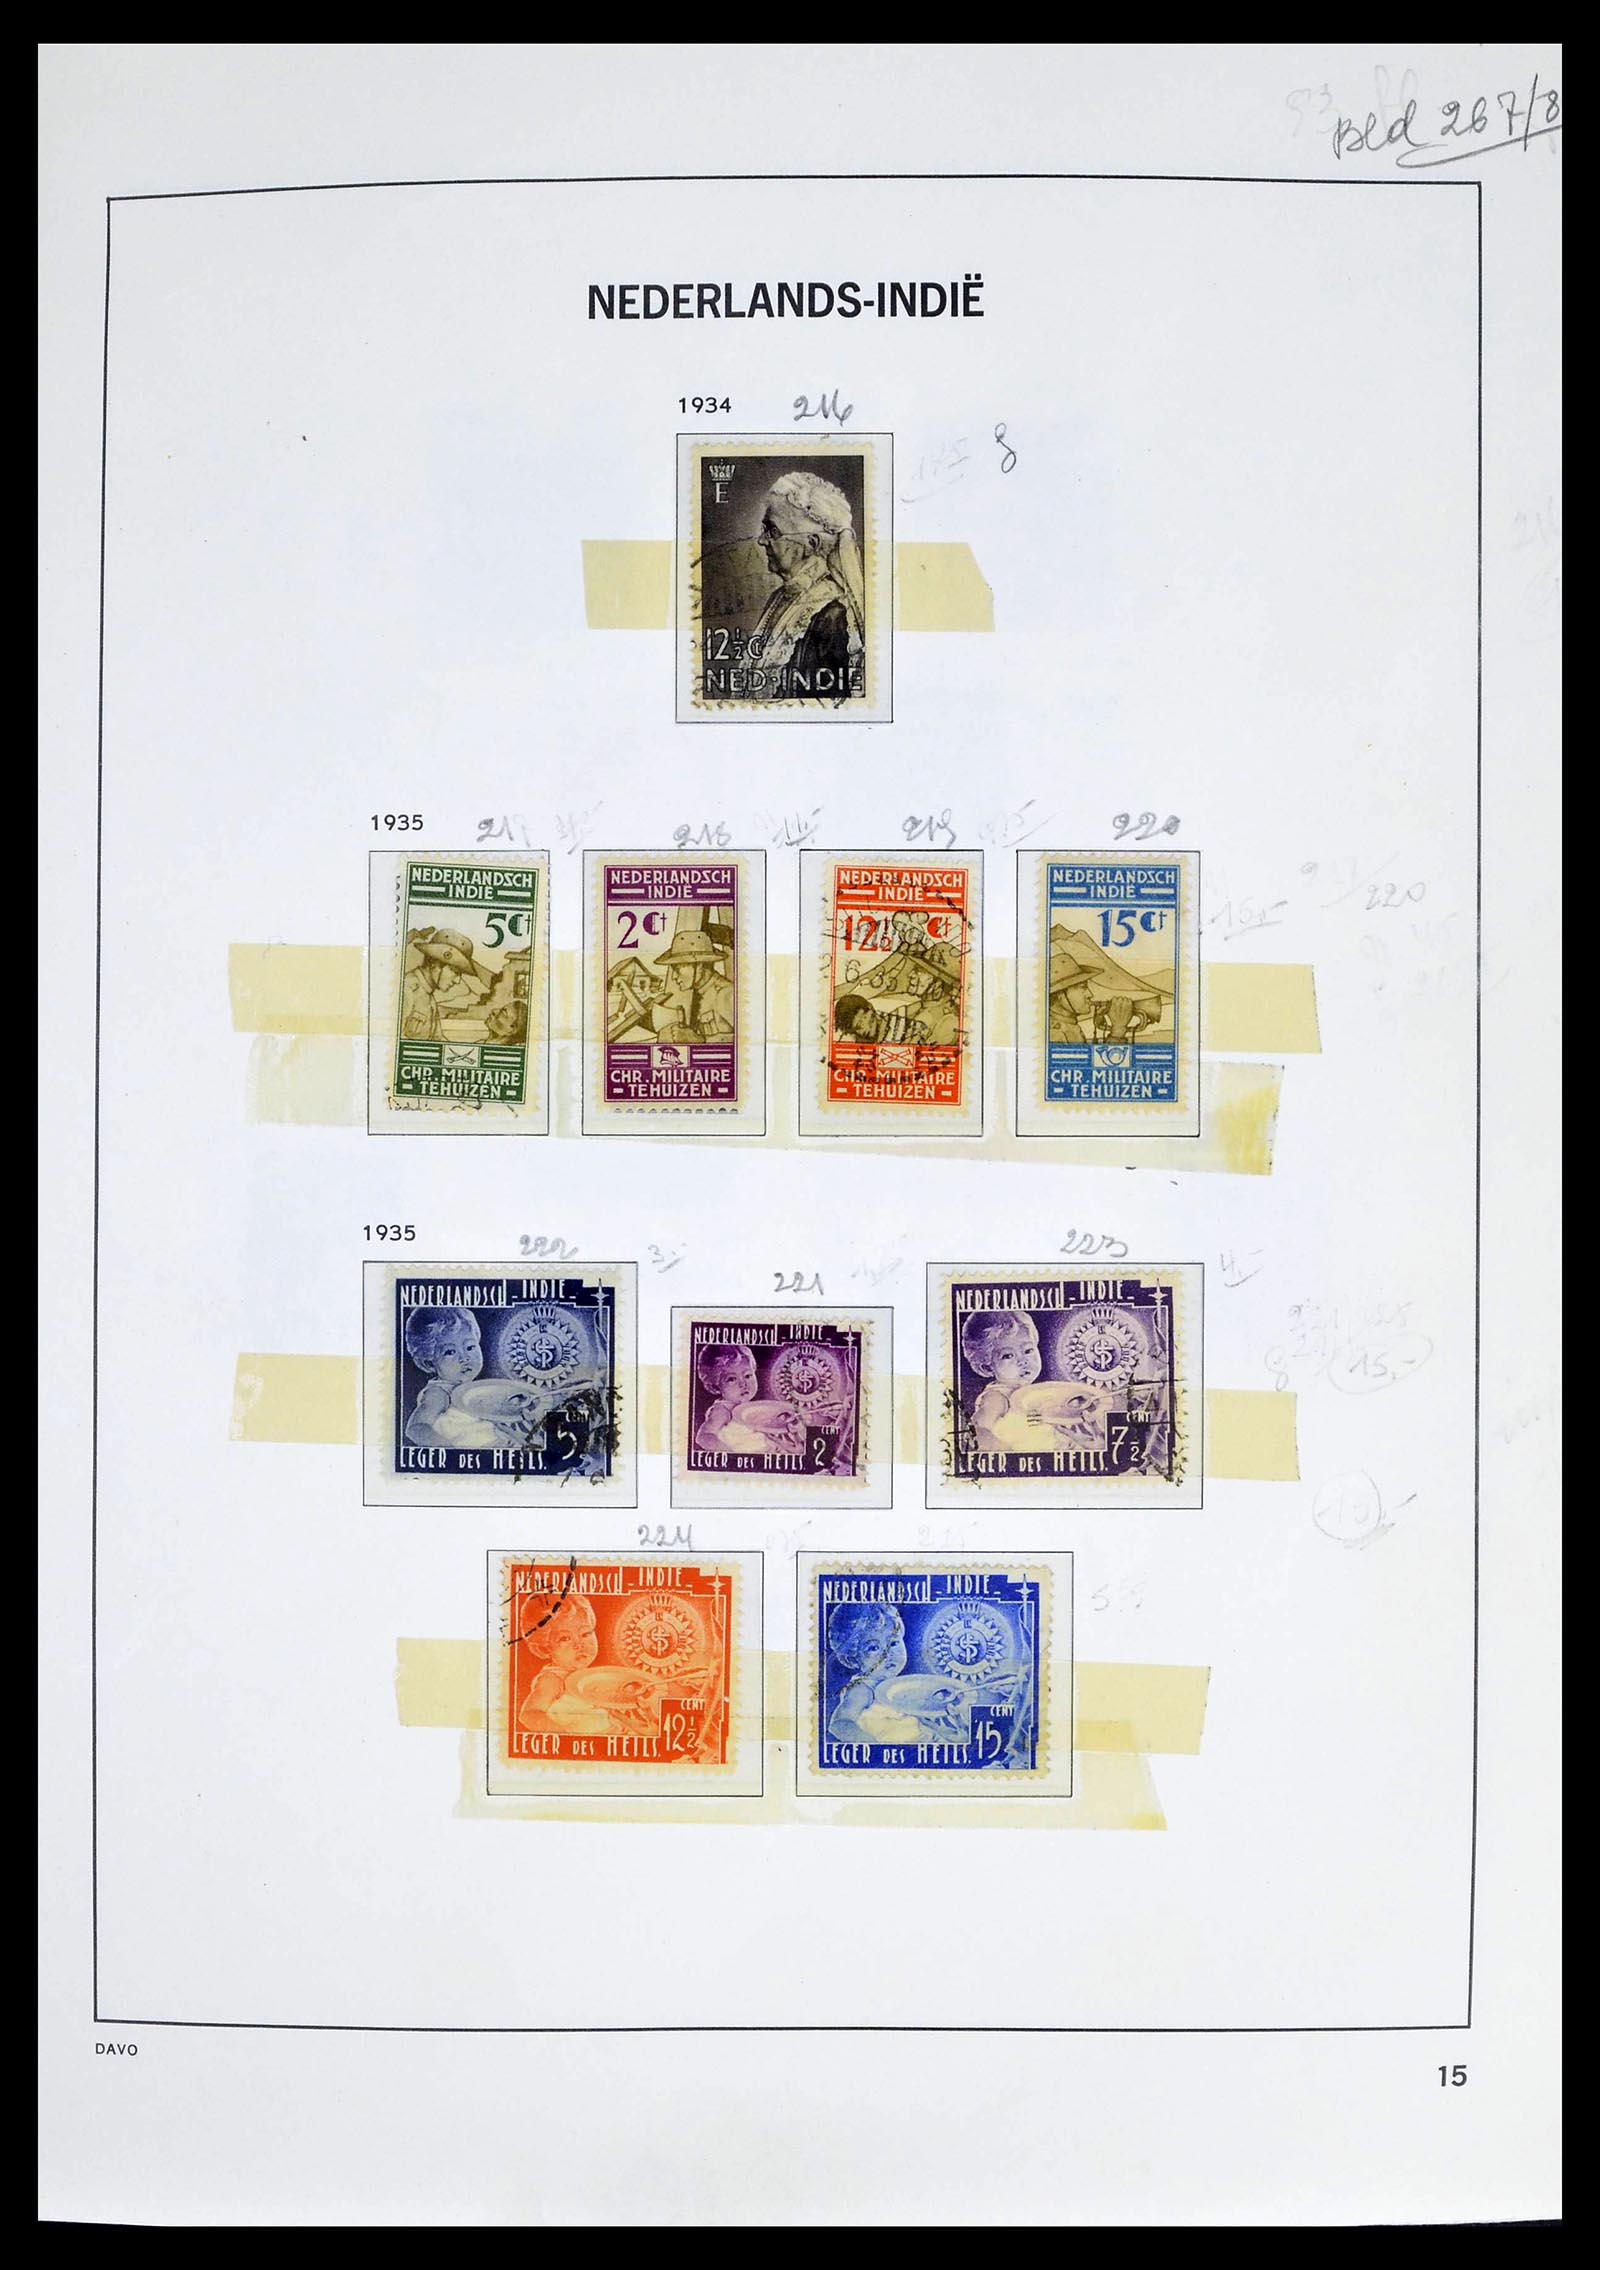 39263 0017 - Stamp collection 39263 Dutch territories 1864-1970.